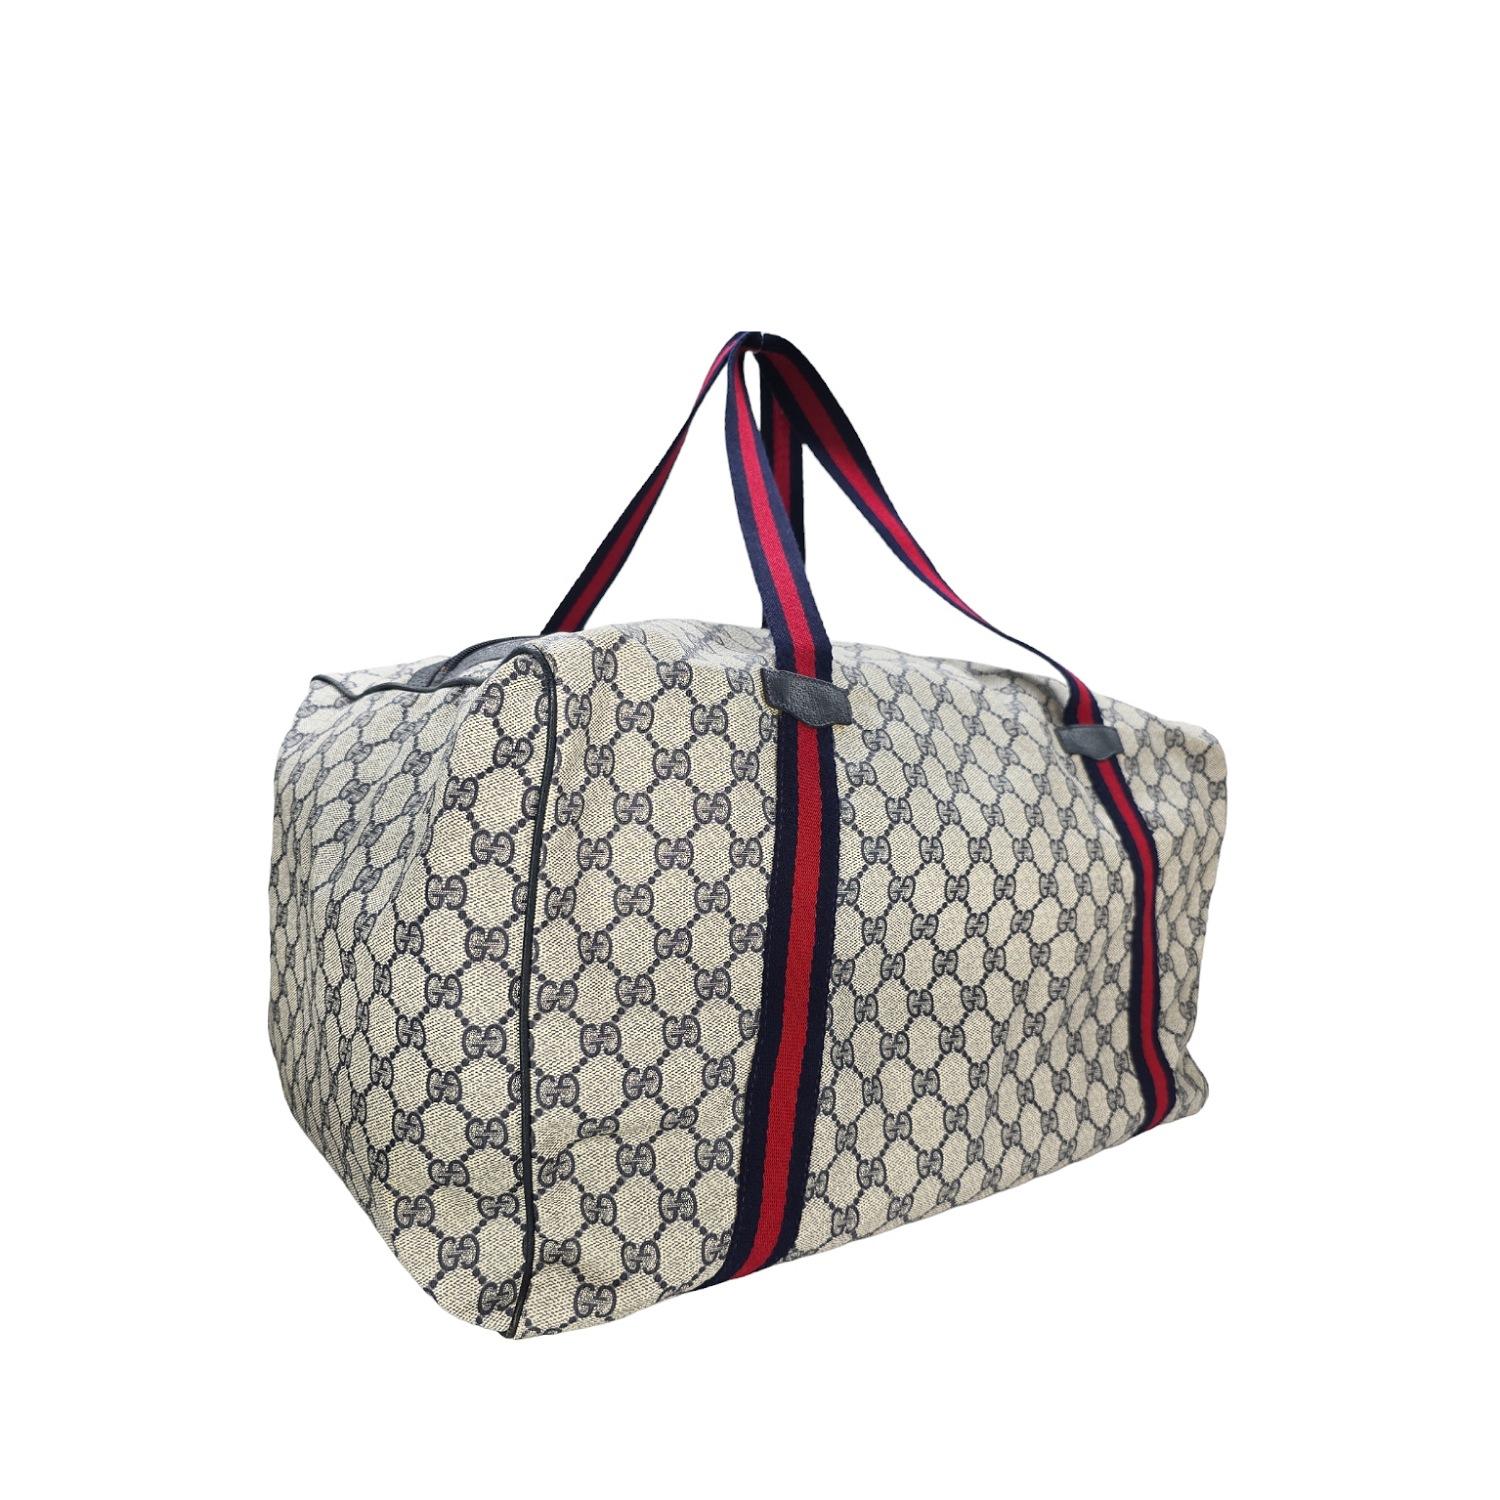 Gucci Vintage GG Plus Weekender Carry-on Duffle Bag In Good Condition For Sale In Scottsdale, AZ